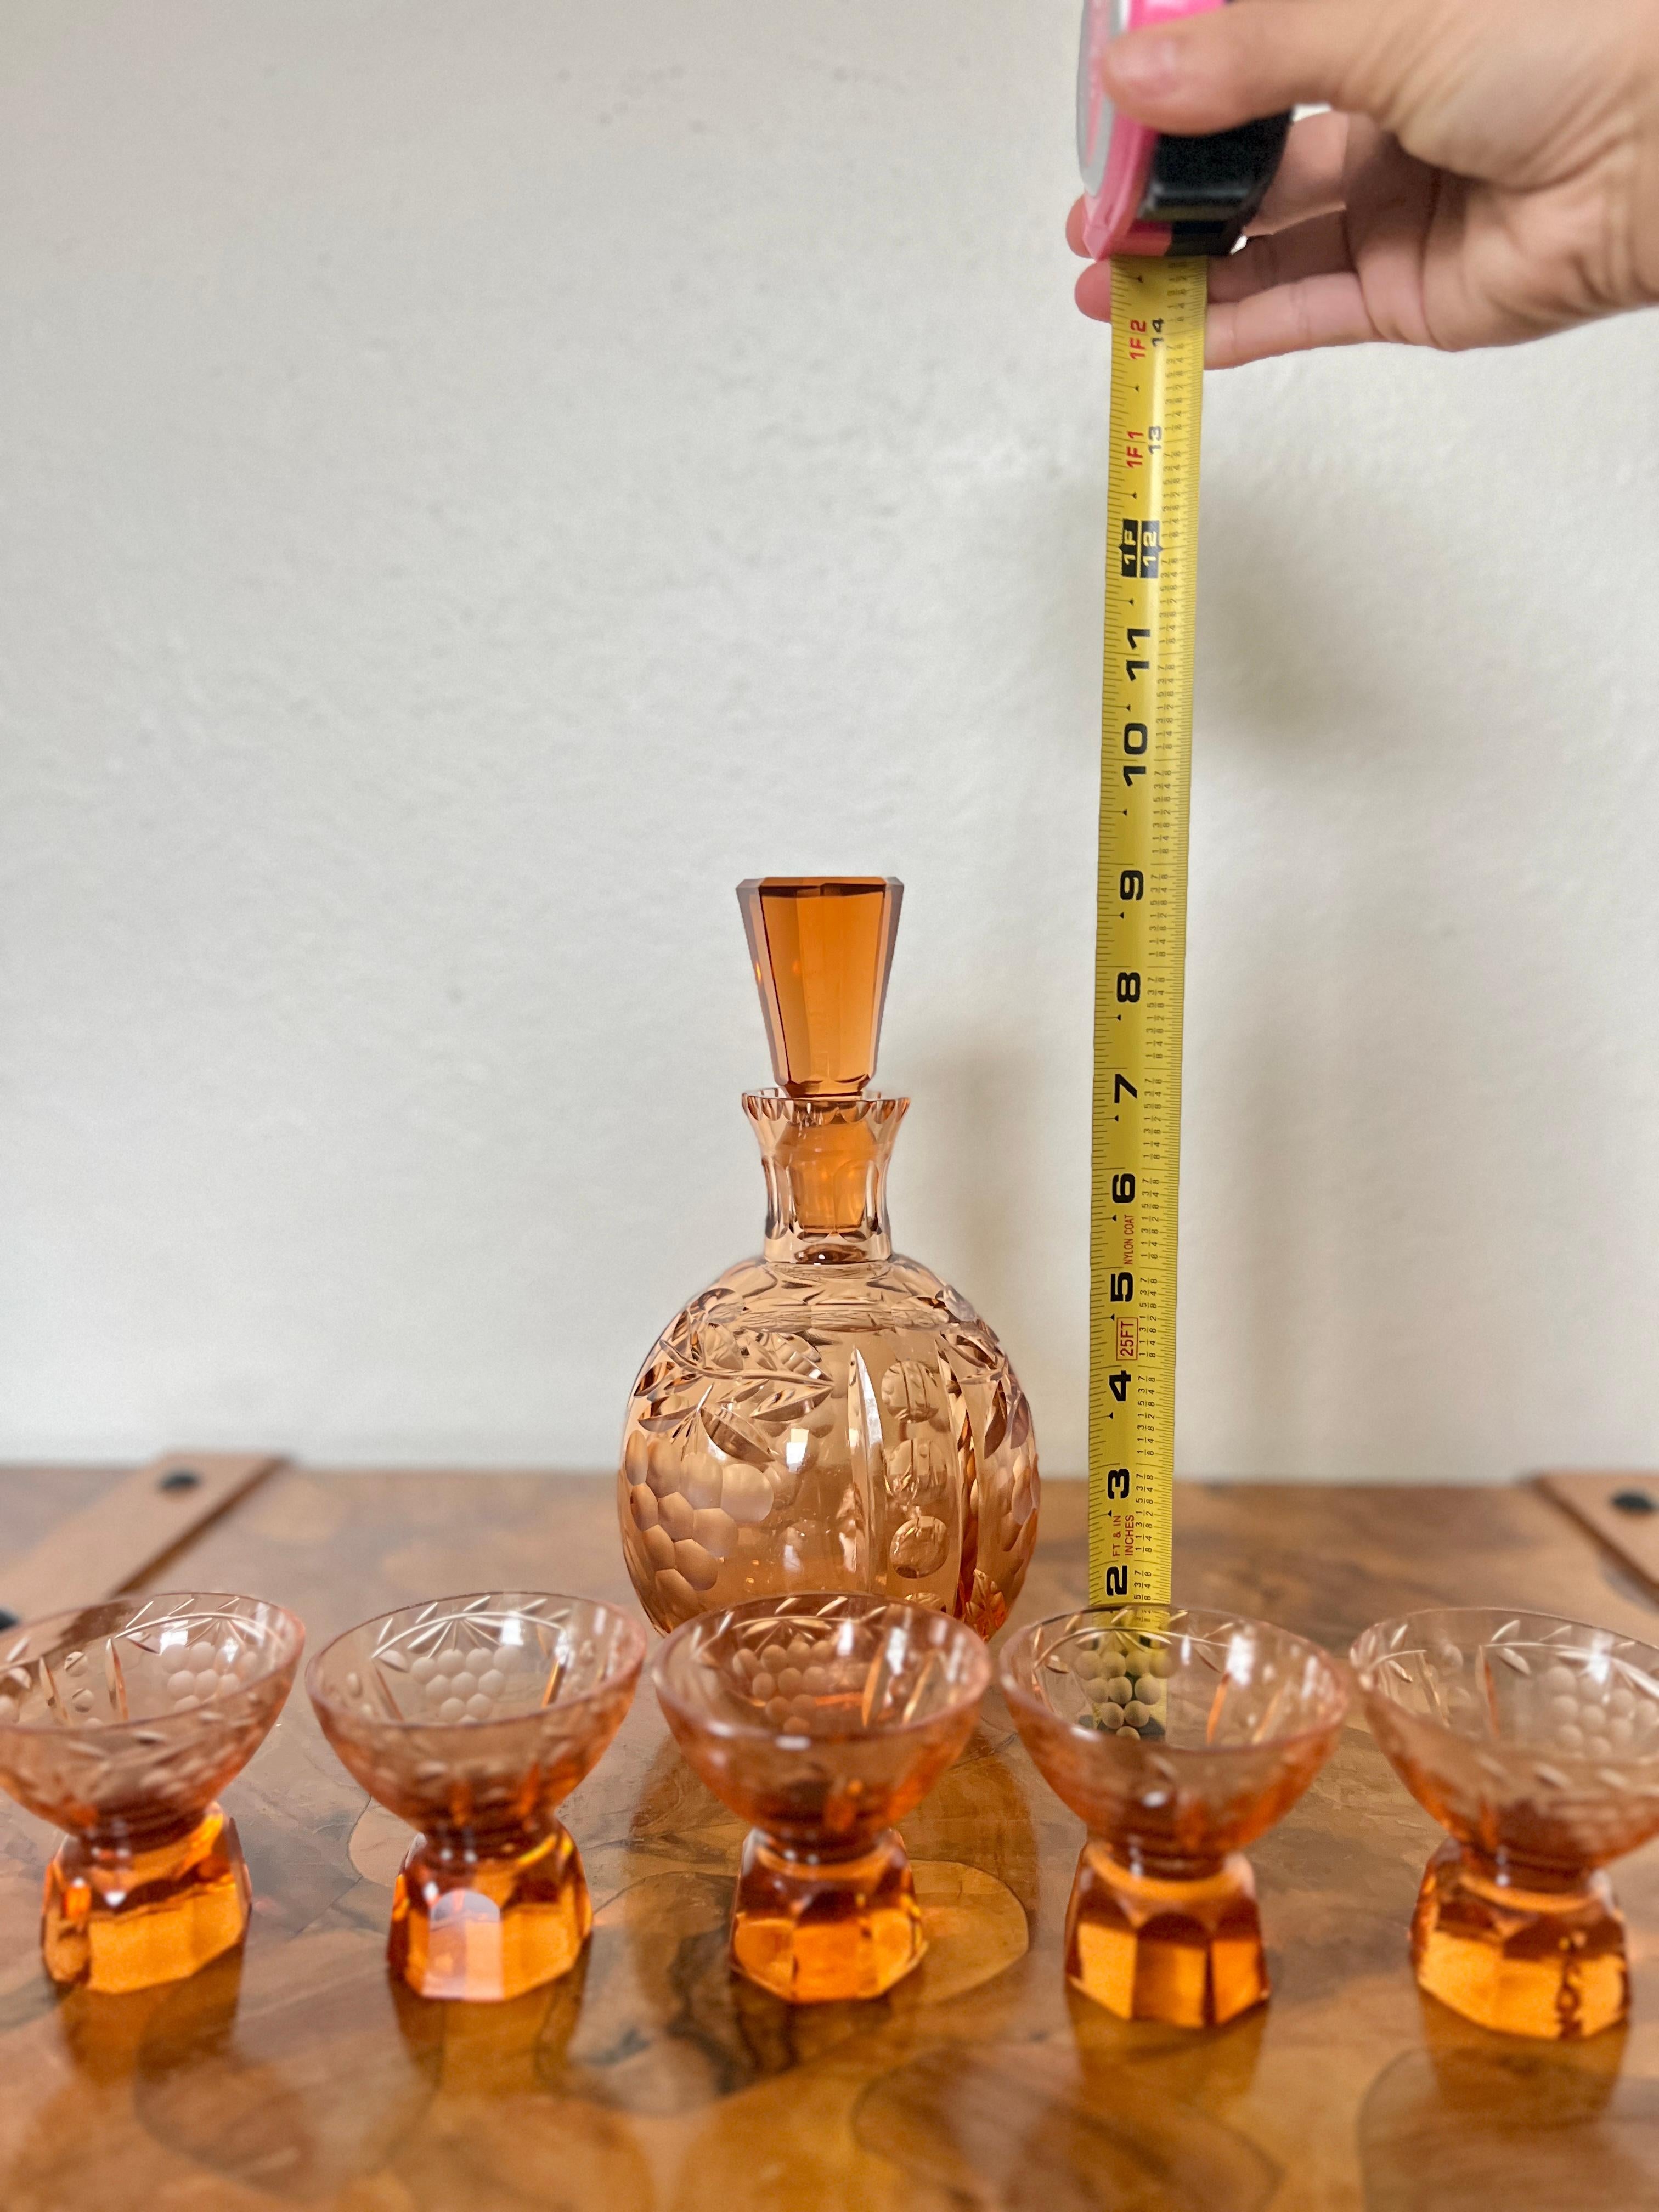 Antique amber cut crystal decanter for wine, liquor or any other solid drink. The decanter is of great quality and has a sleek elegant design. The floral decor is hand cut and hand polished. The colour is unusual and rare. Highly decorative item. An